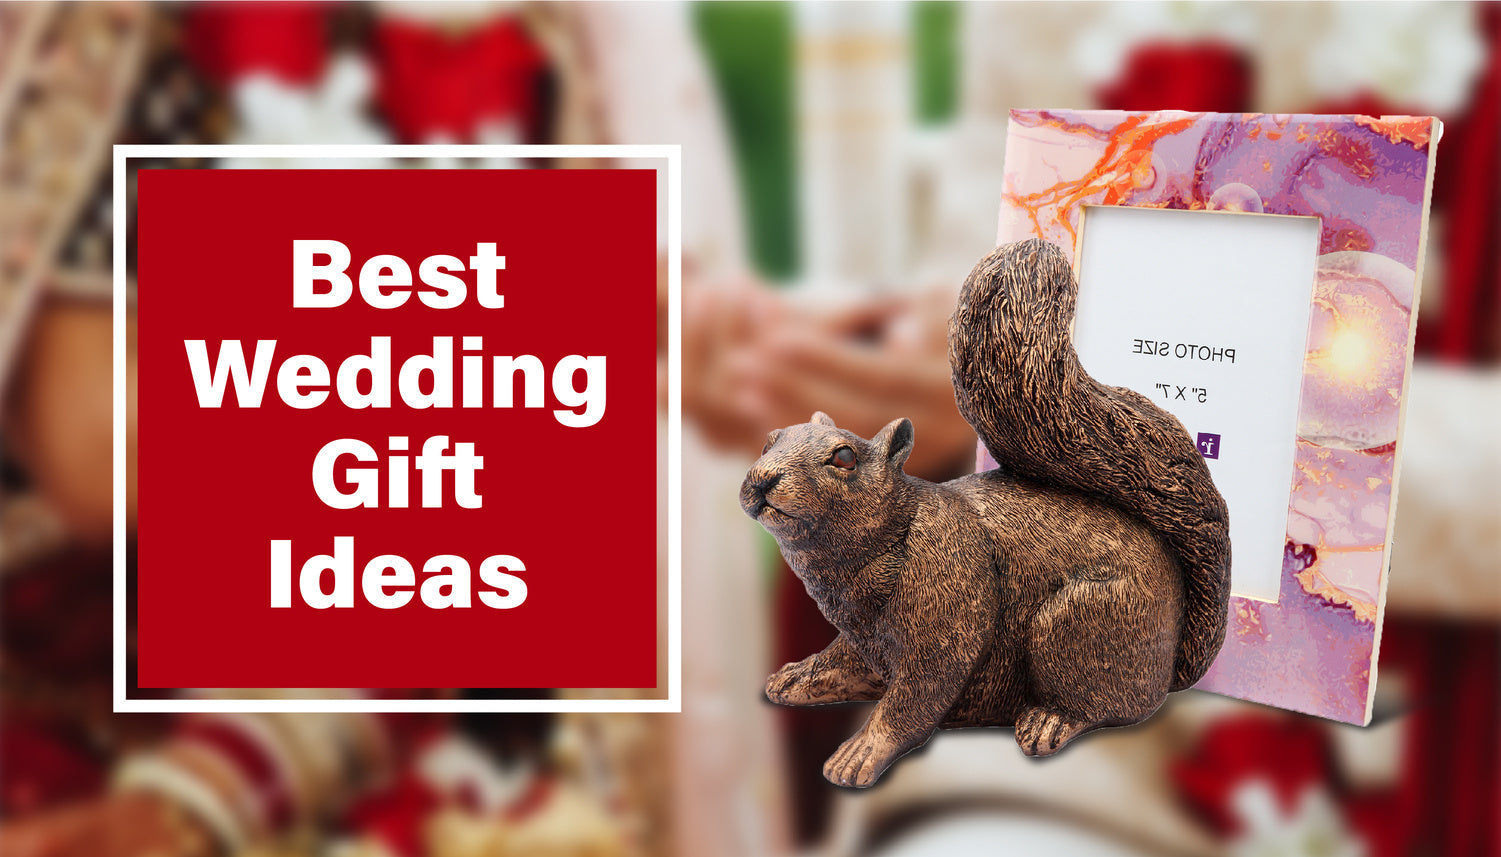 10 ideas for unique wedding gifts the newlyweds actually want  Thoughtful wedding  gifts Wedding gifts for newlyweds Unique wedding gifts